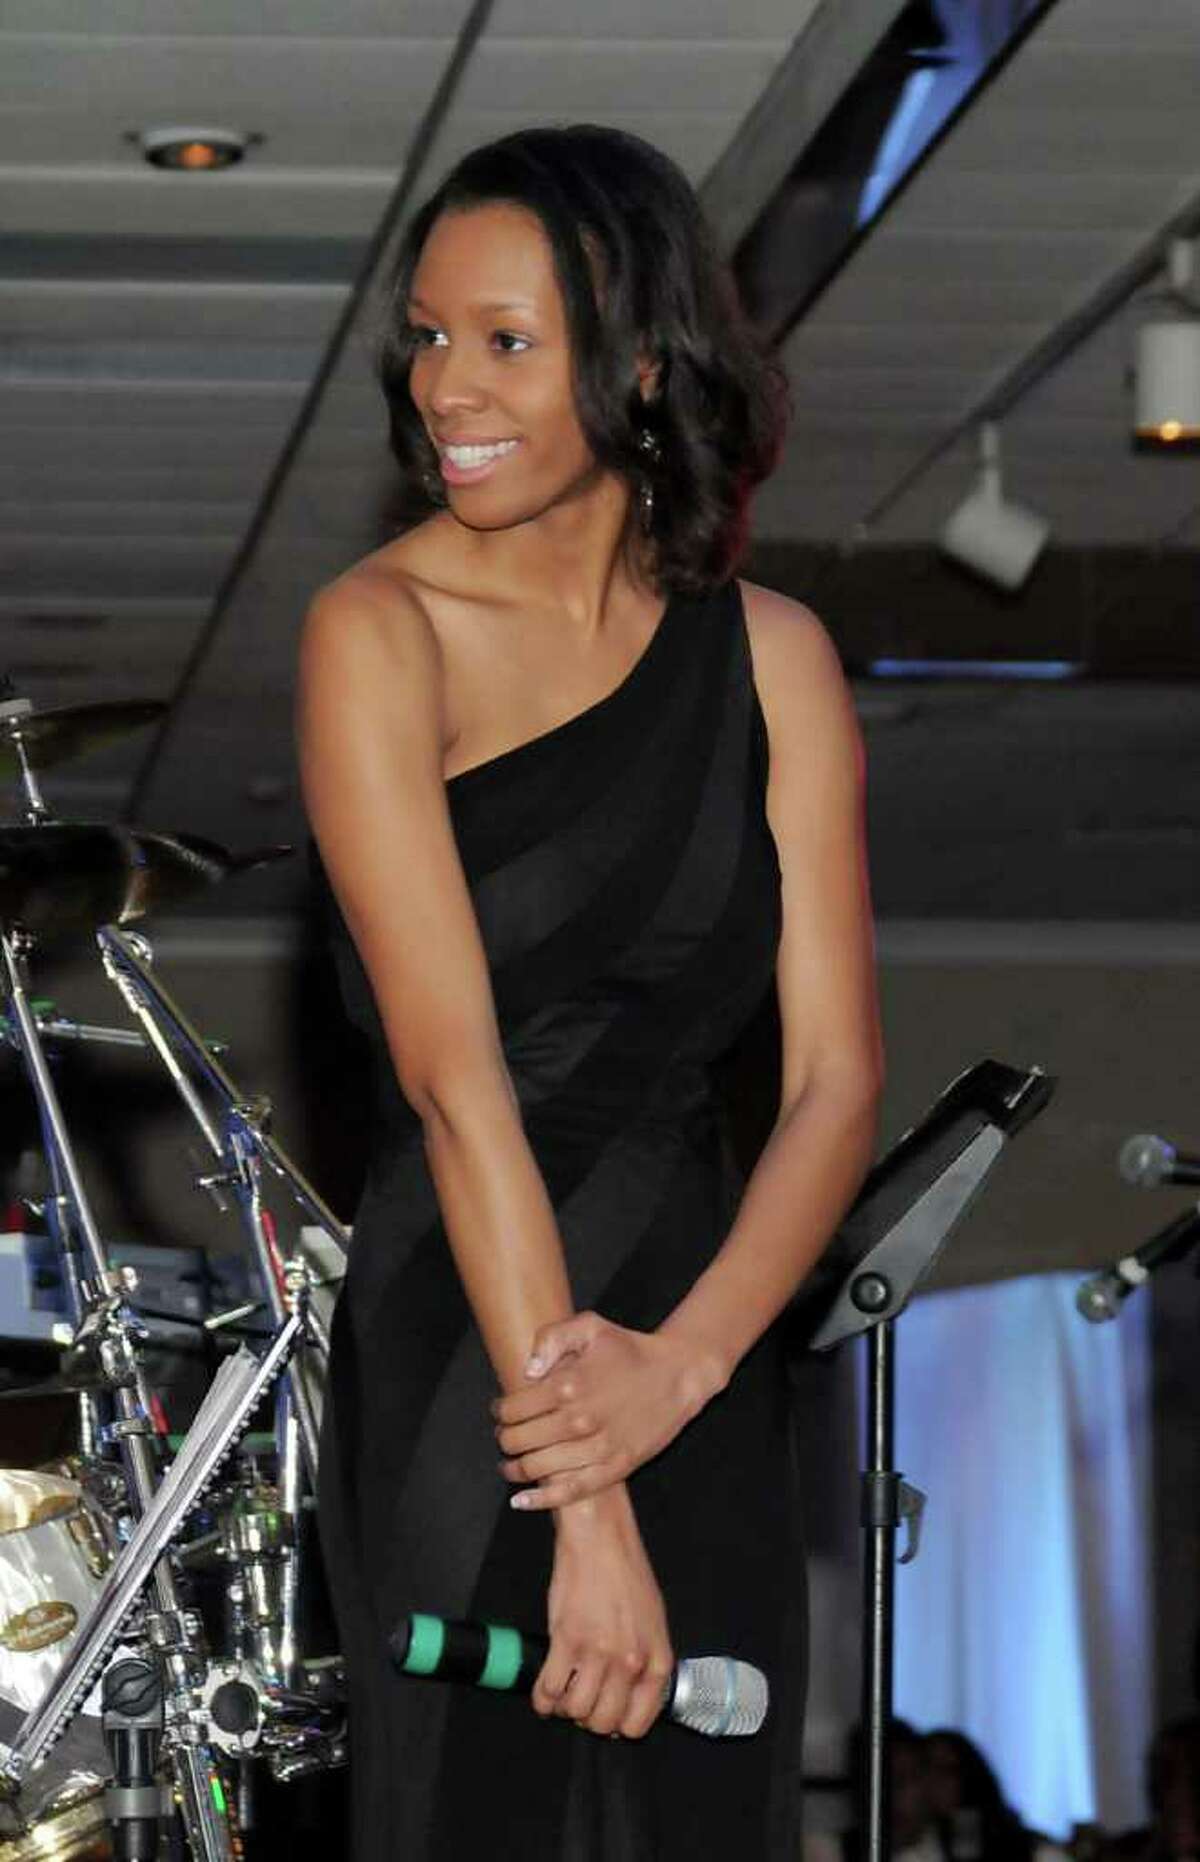 The Hord Foundation Inc. held it's 22nd Annual Gala at the Amber Room Colonnade in Danbury on Saturday Feb. 27, 2011. Danbury native, Simone Hill, a Hord scholarship recipient.